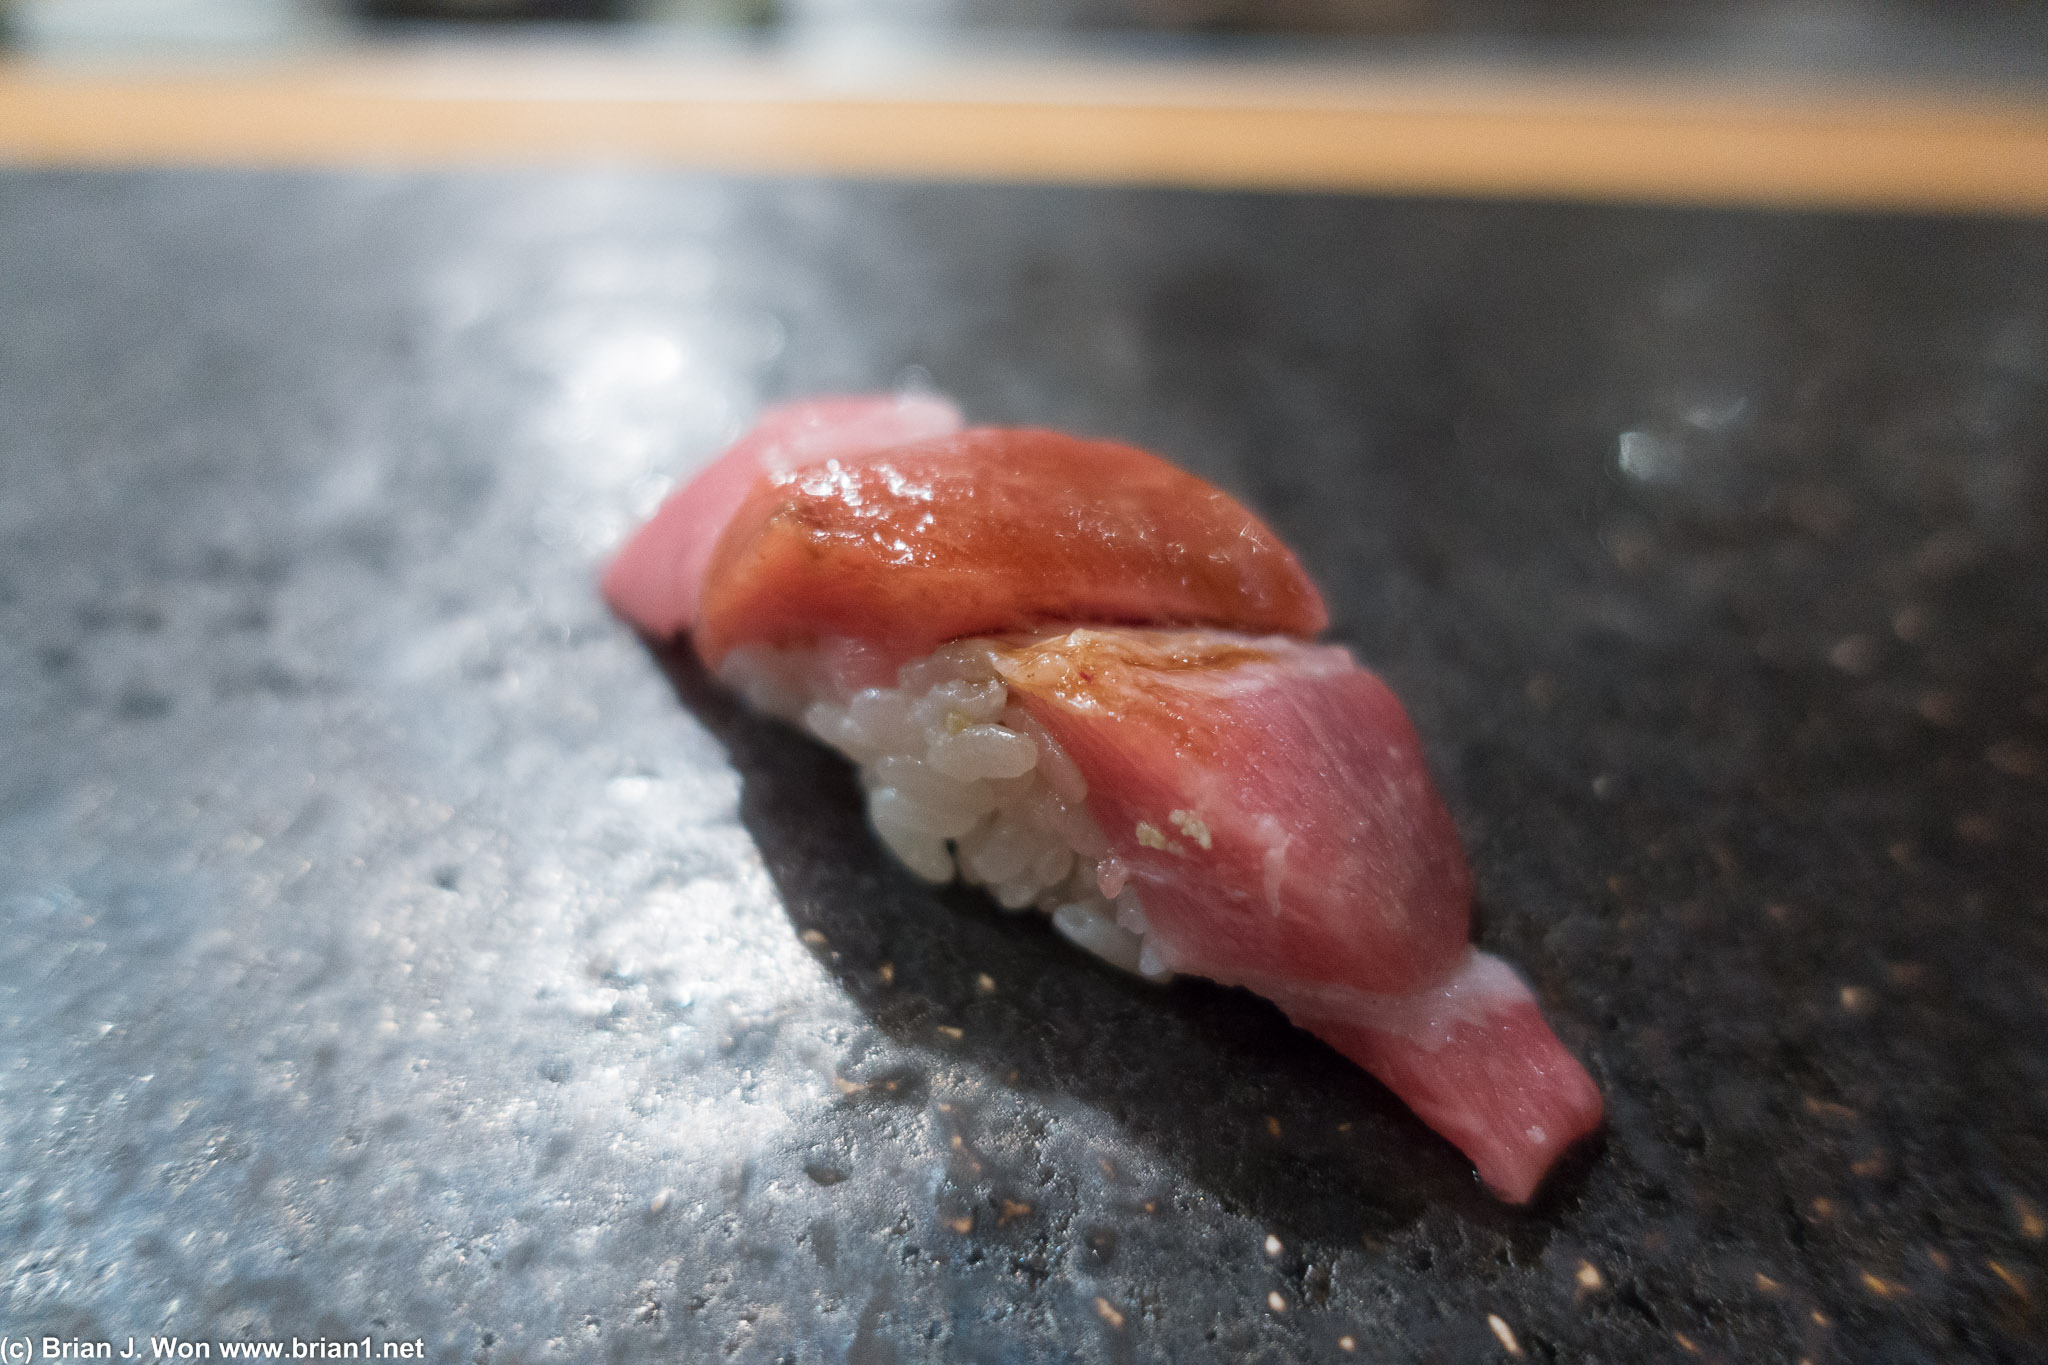 Oo-toro was ridiculously marbled.